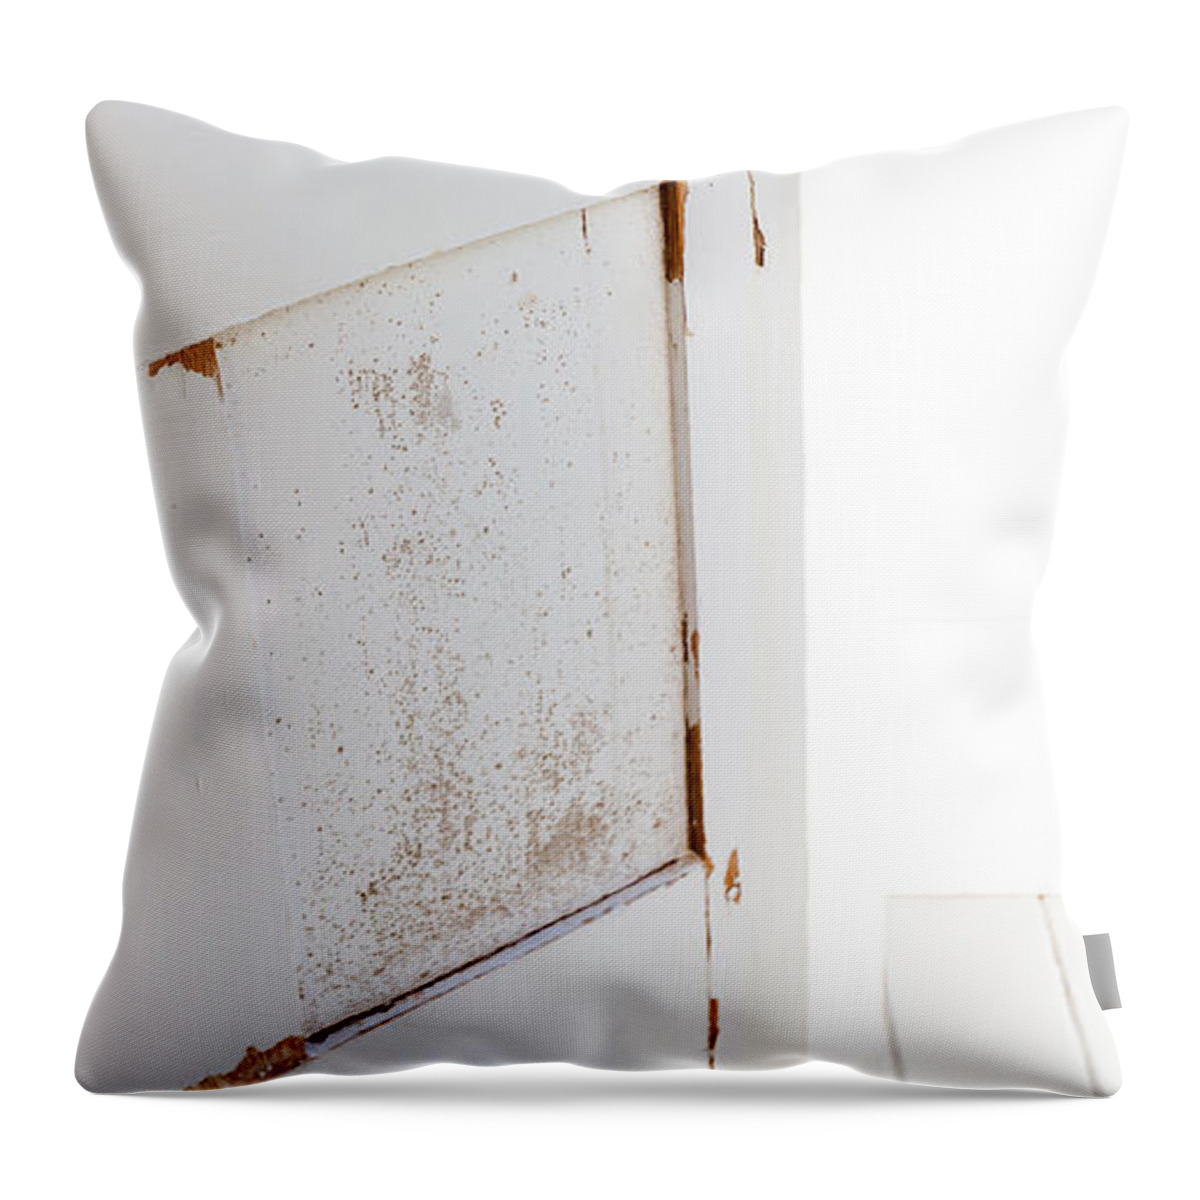 Conceptual Throw Pillow featuring the photograph Open White Door With Latch by Jo Ann Tomaselli